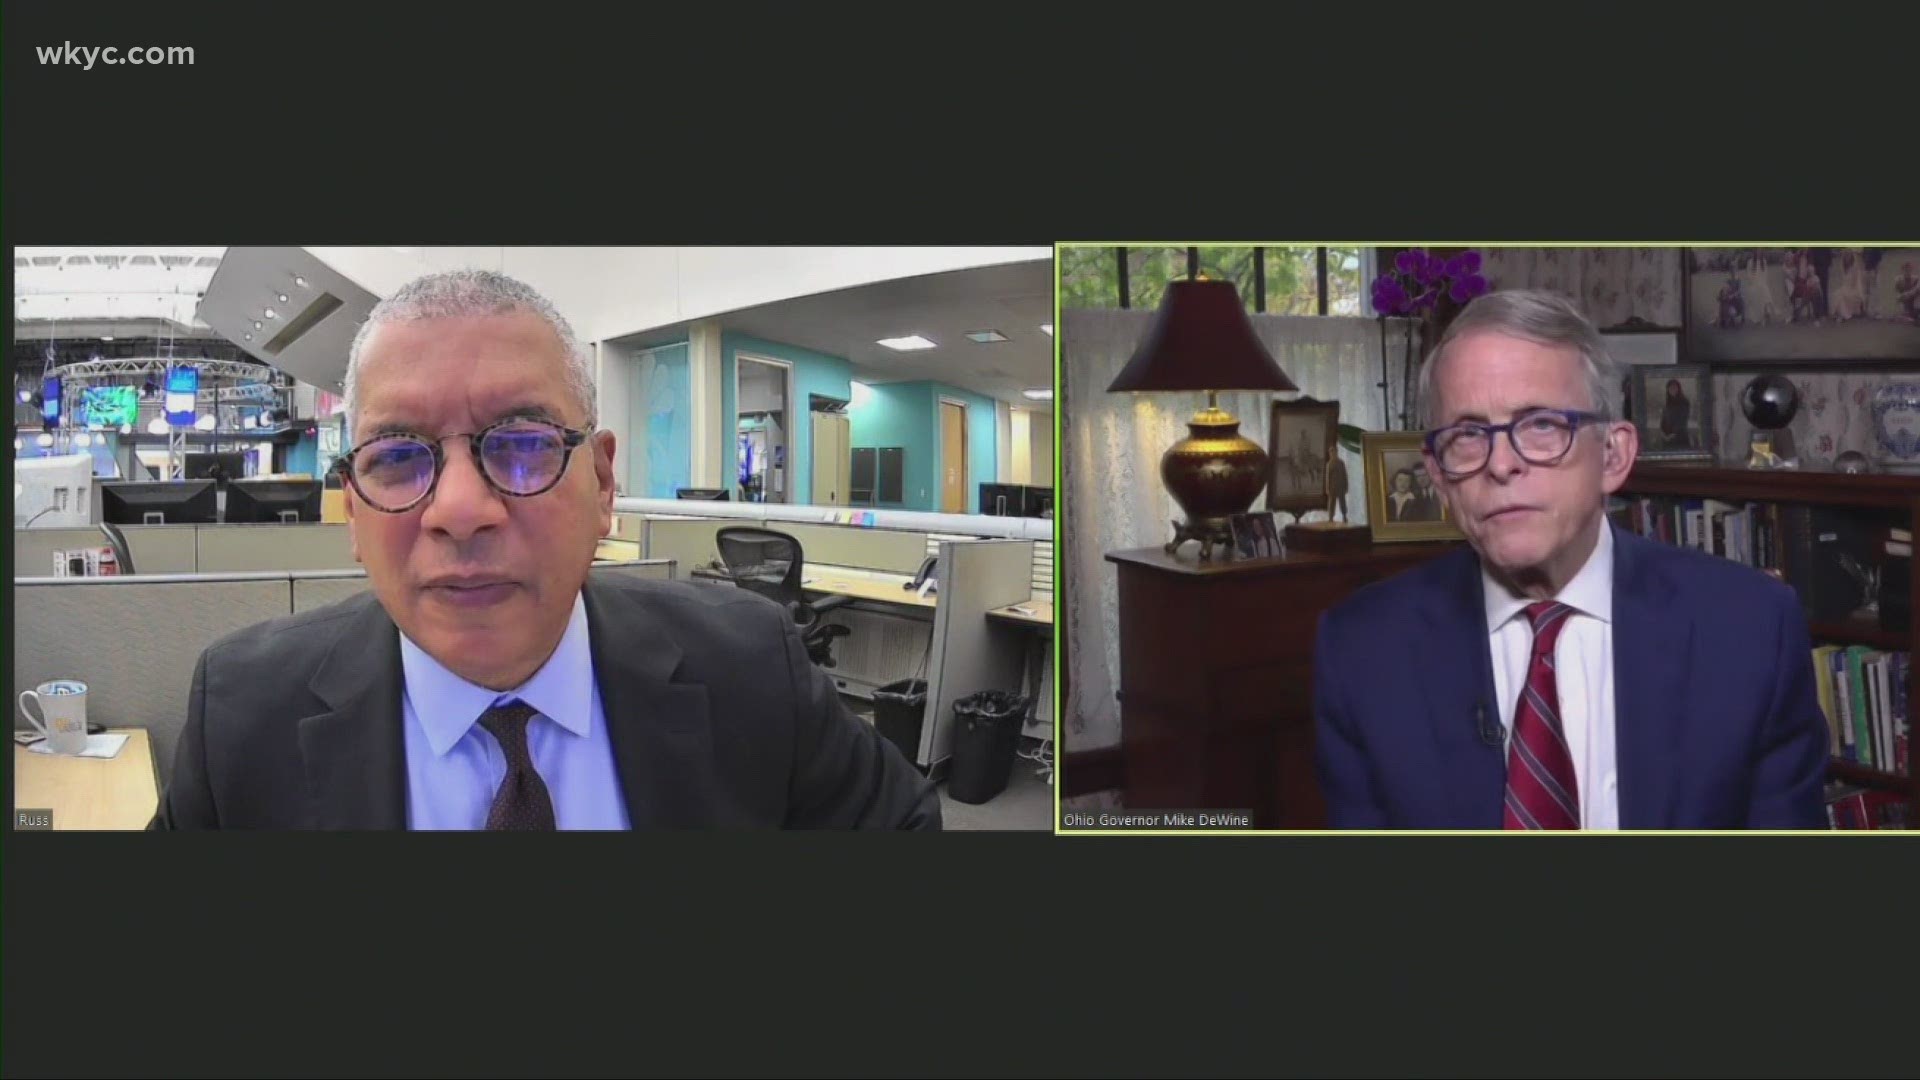 DeWine joined Russ Mitchell for a Zoom interview on Thursday. The interview came as Ohio hit a record number of daily COVID-19 cases.